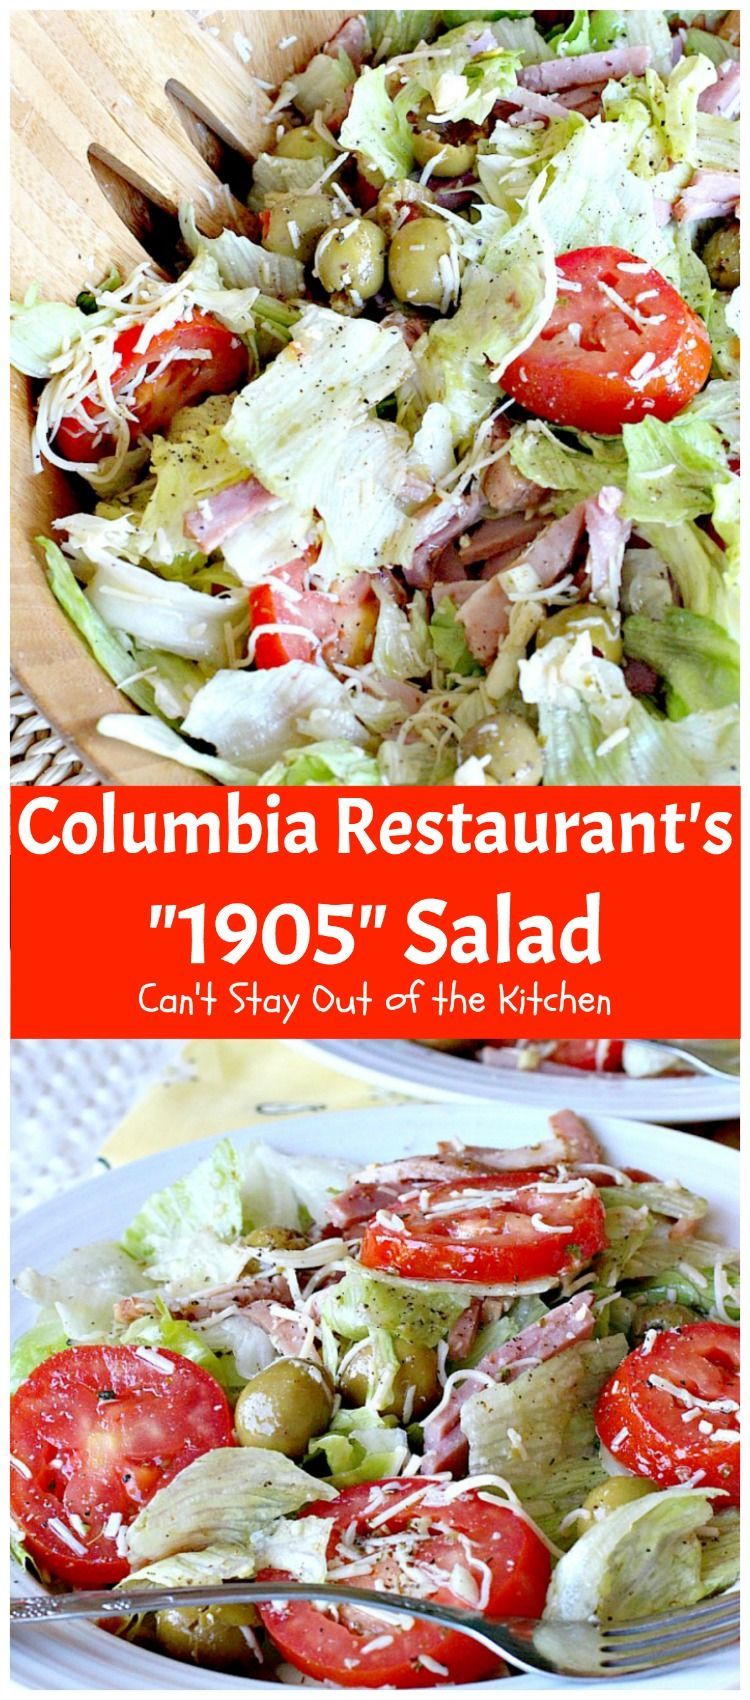 Columbia Restaurant’s “1905” Salad | Can’t Stay Out of the Kitchen | fabulous…